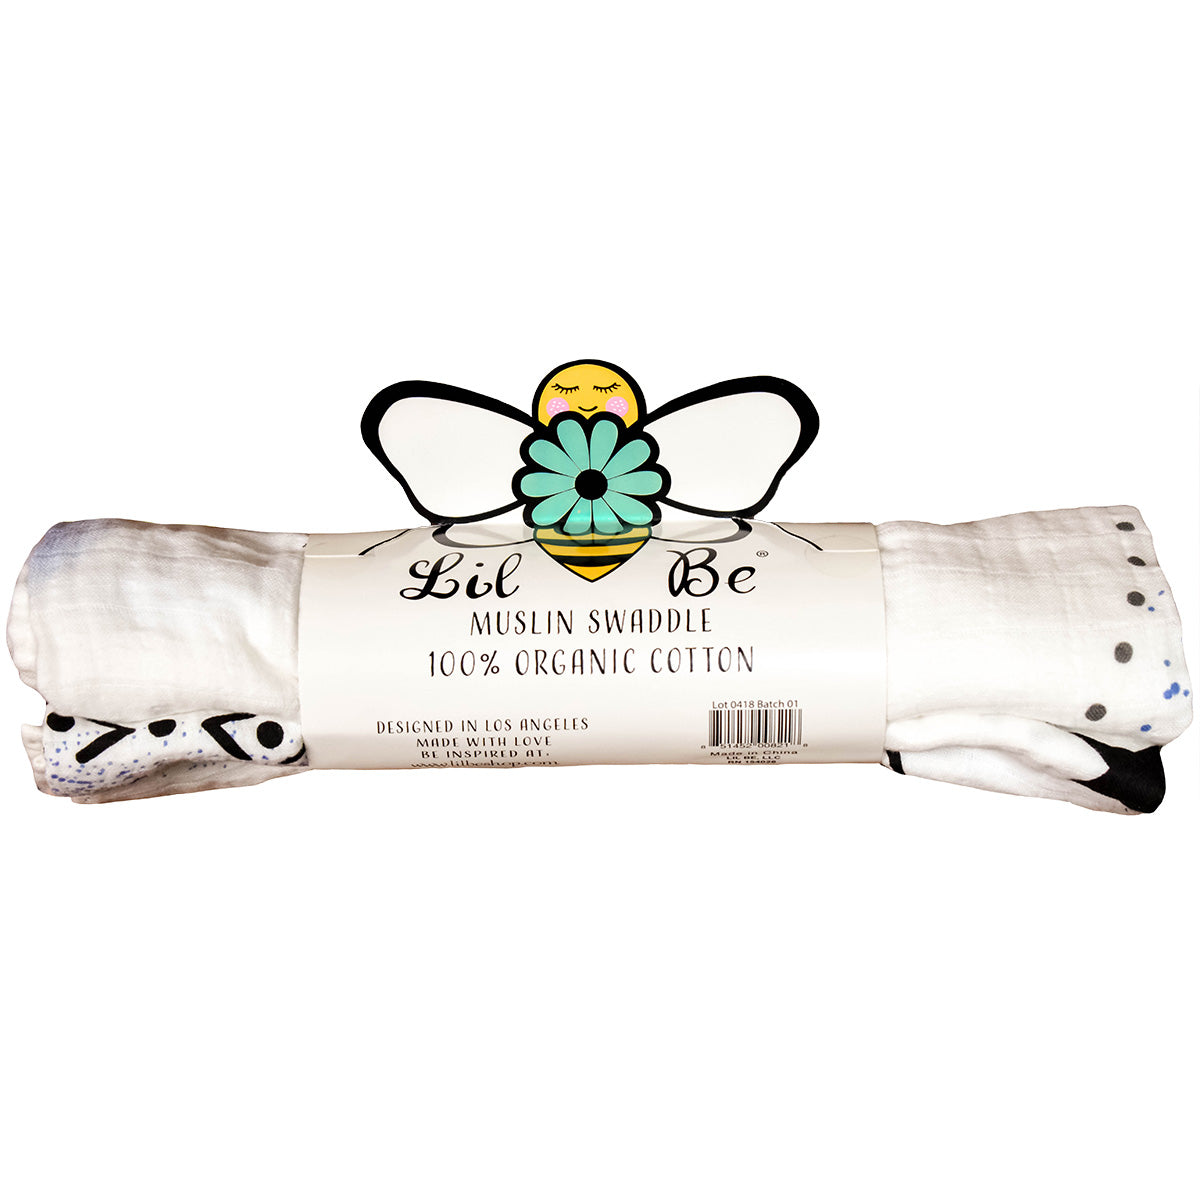 Organic Moon Swaddle Blanket with Back Lil Be Package View